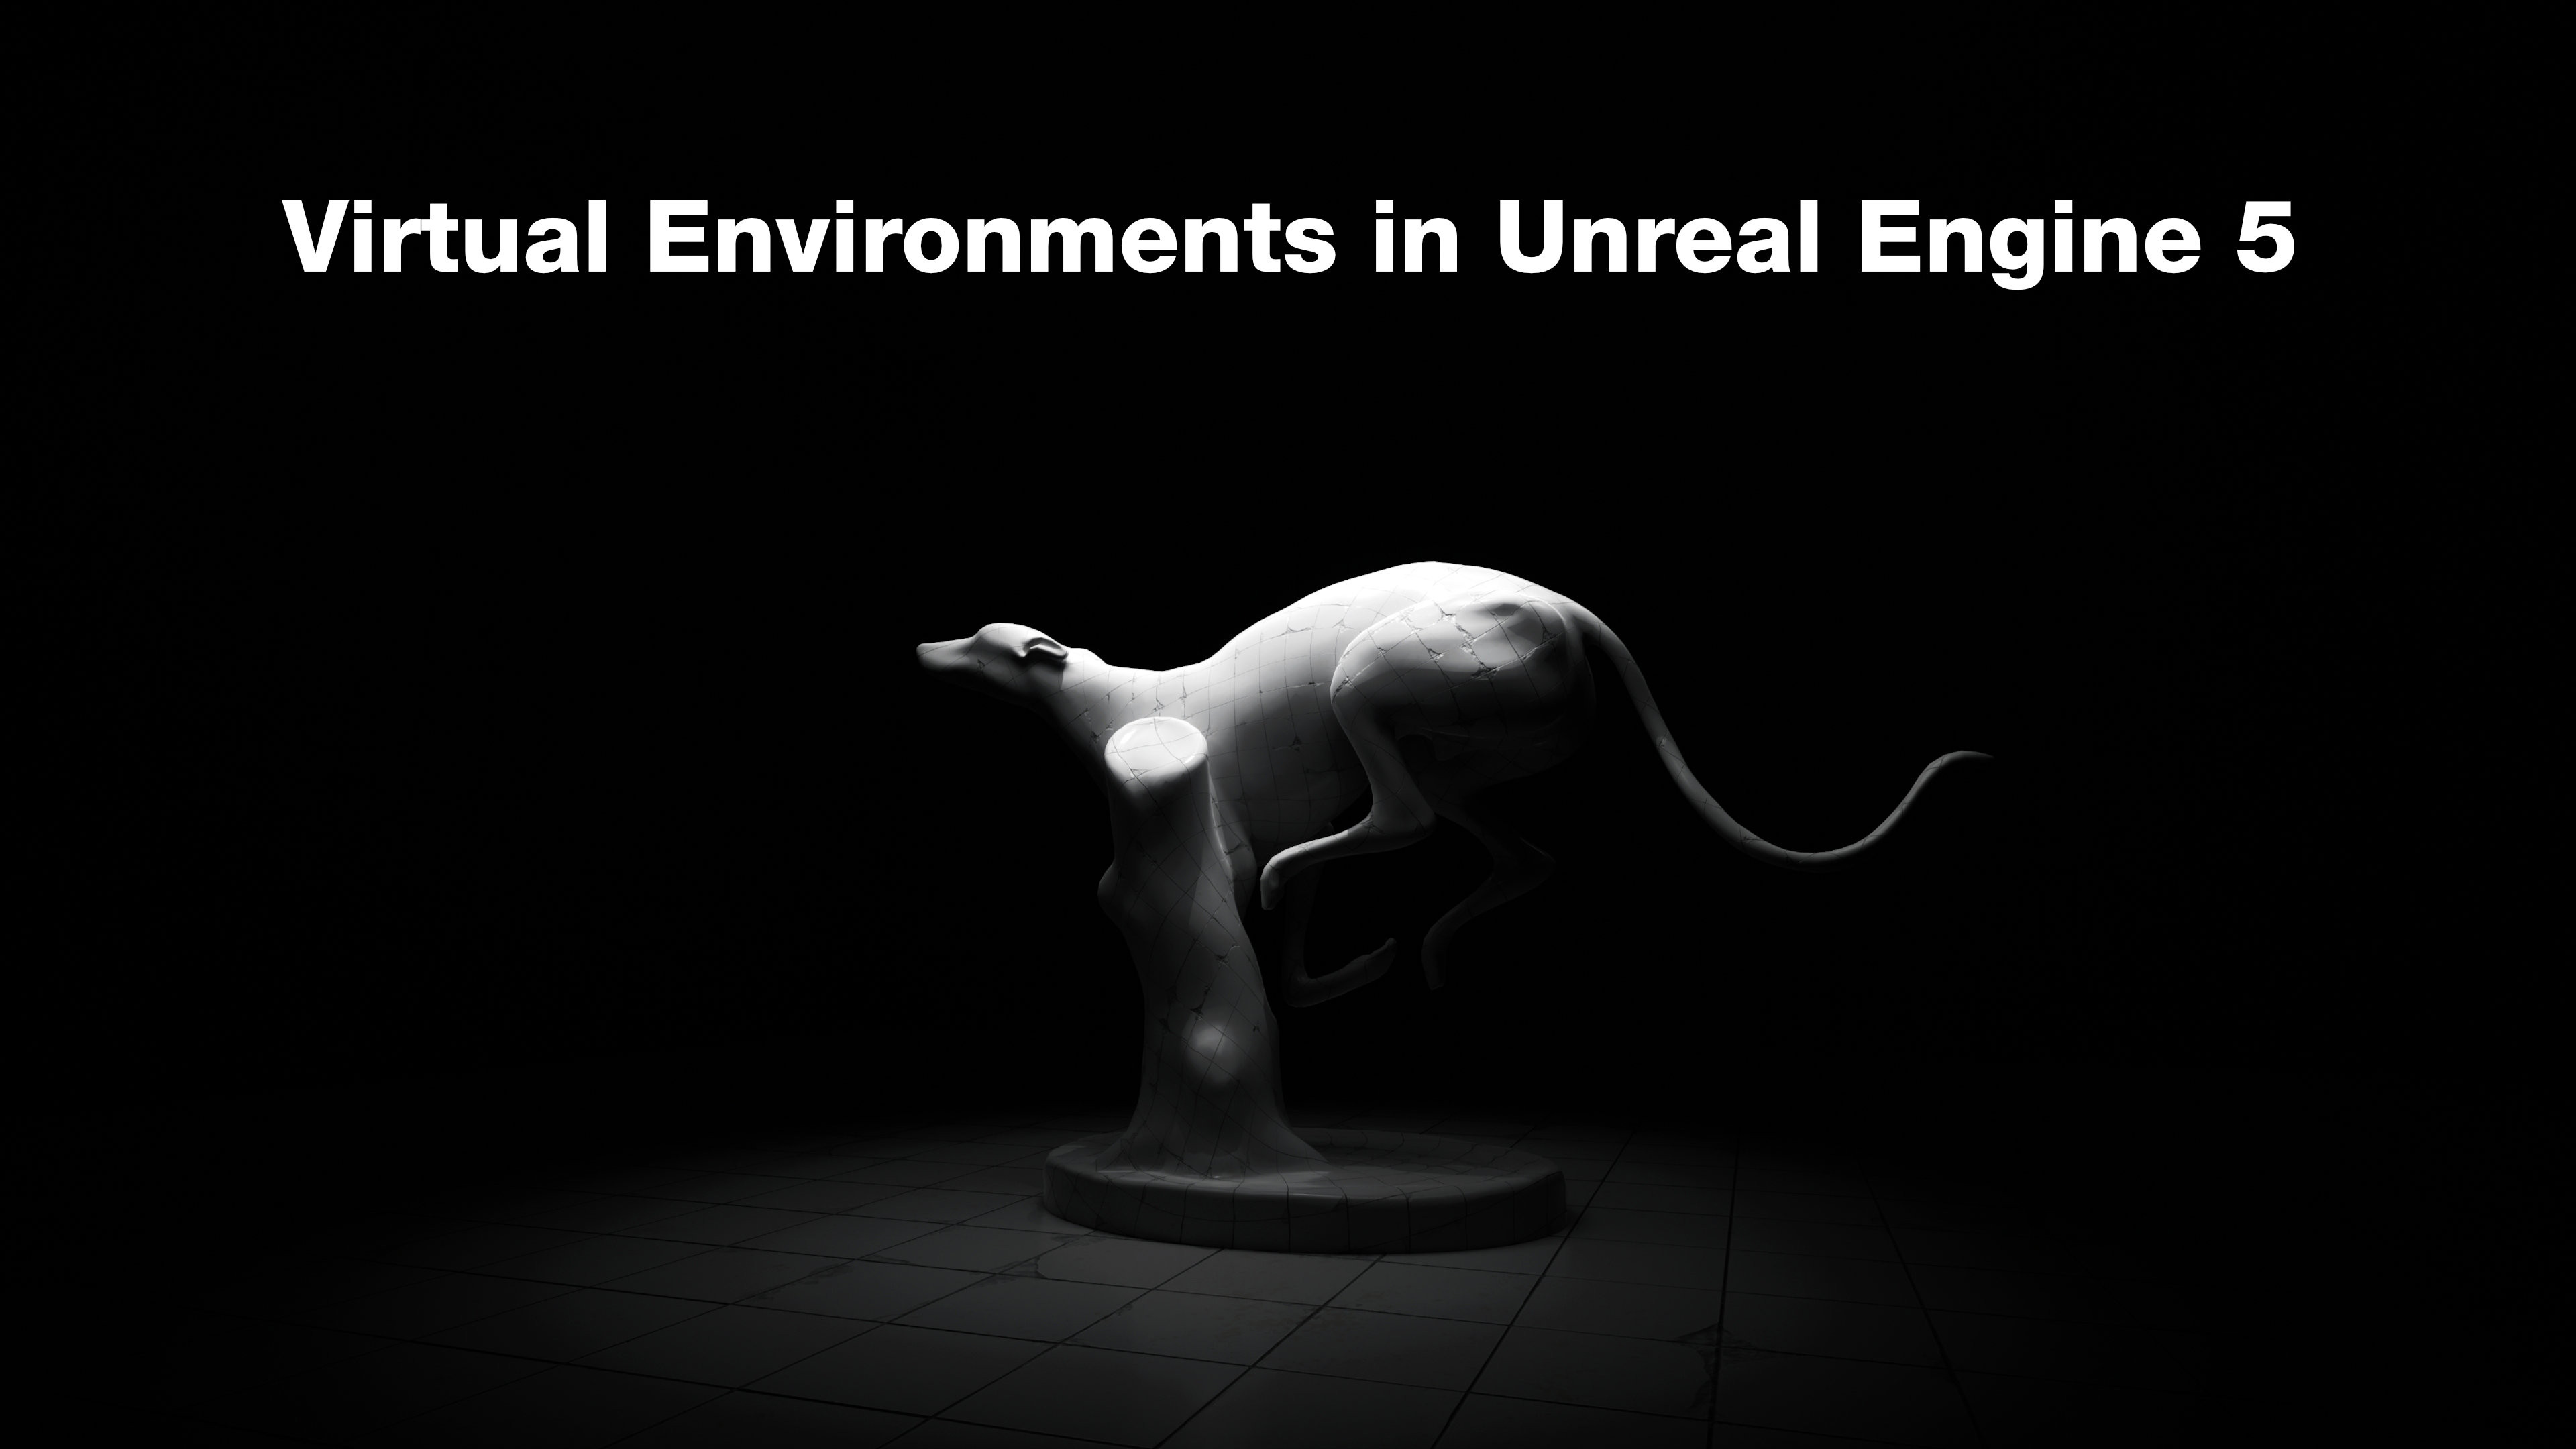 Unleash the power of Unreal Engine 5 in stunning virtual environments!